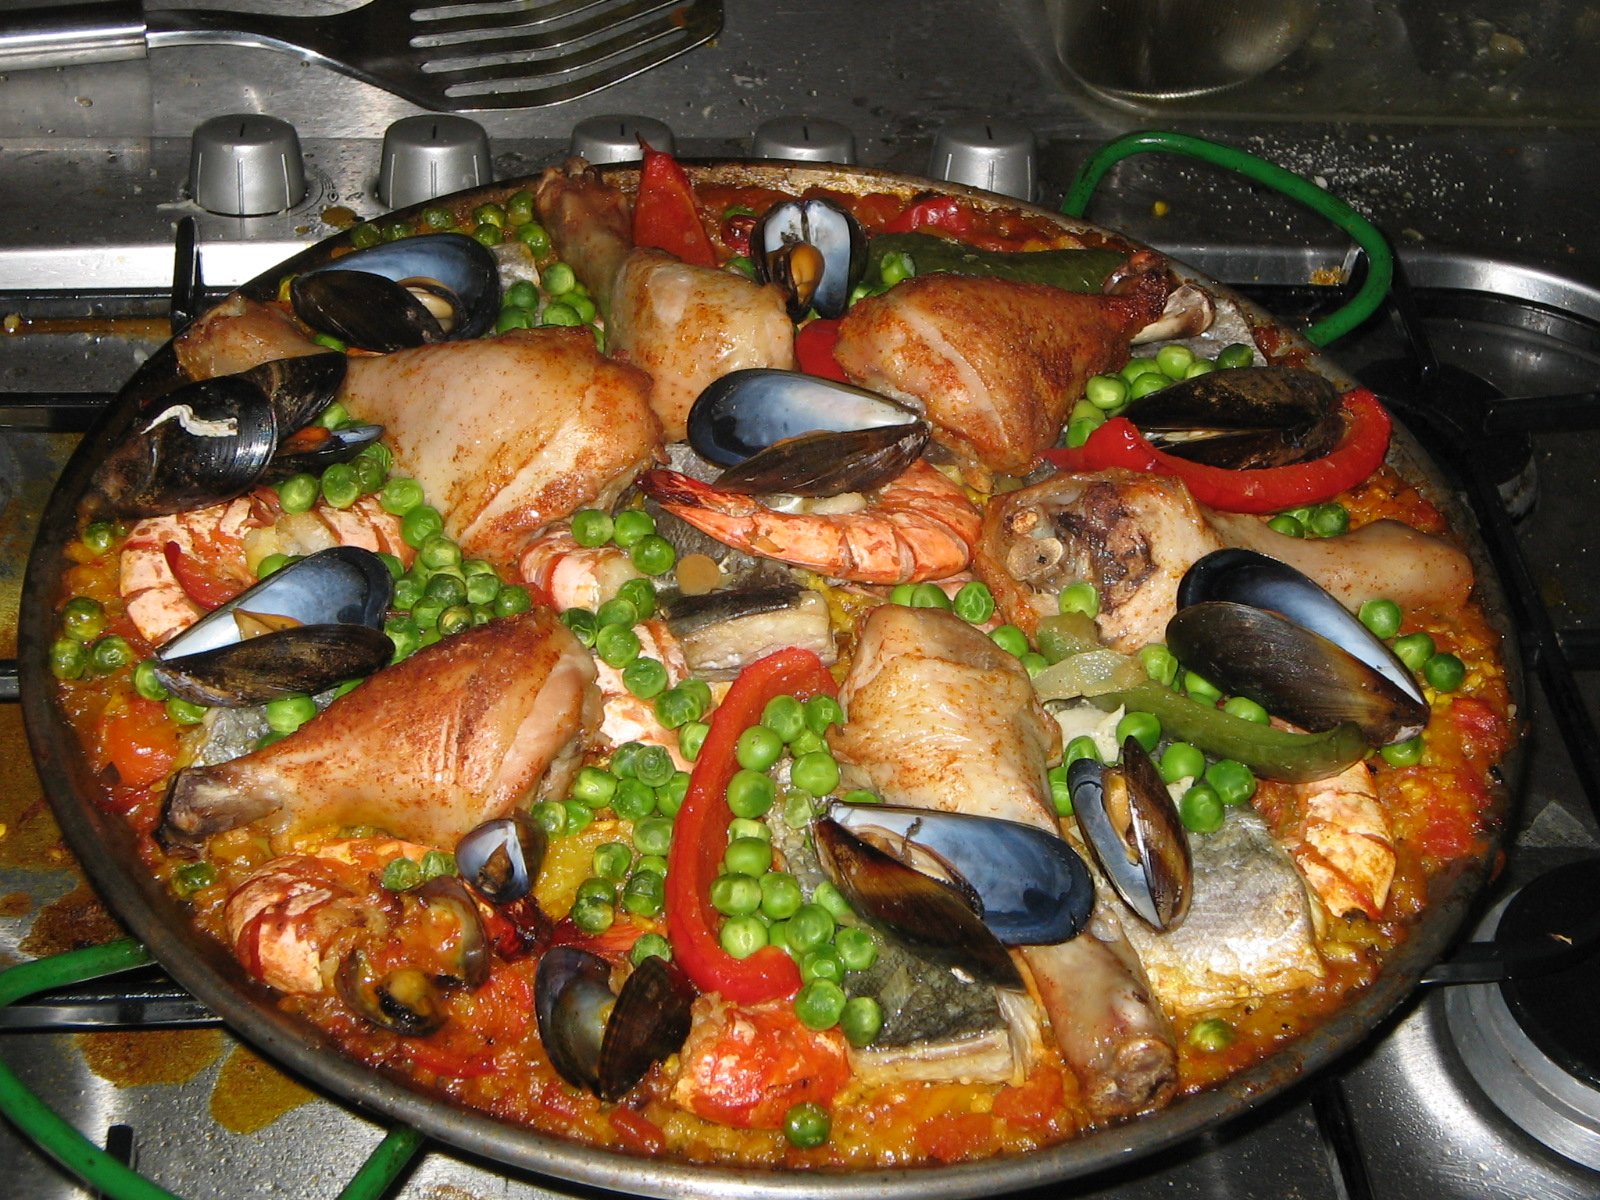 a dish is displayed on the stove cooking